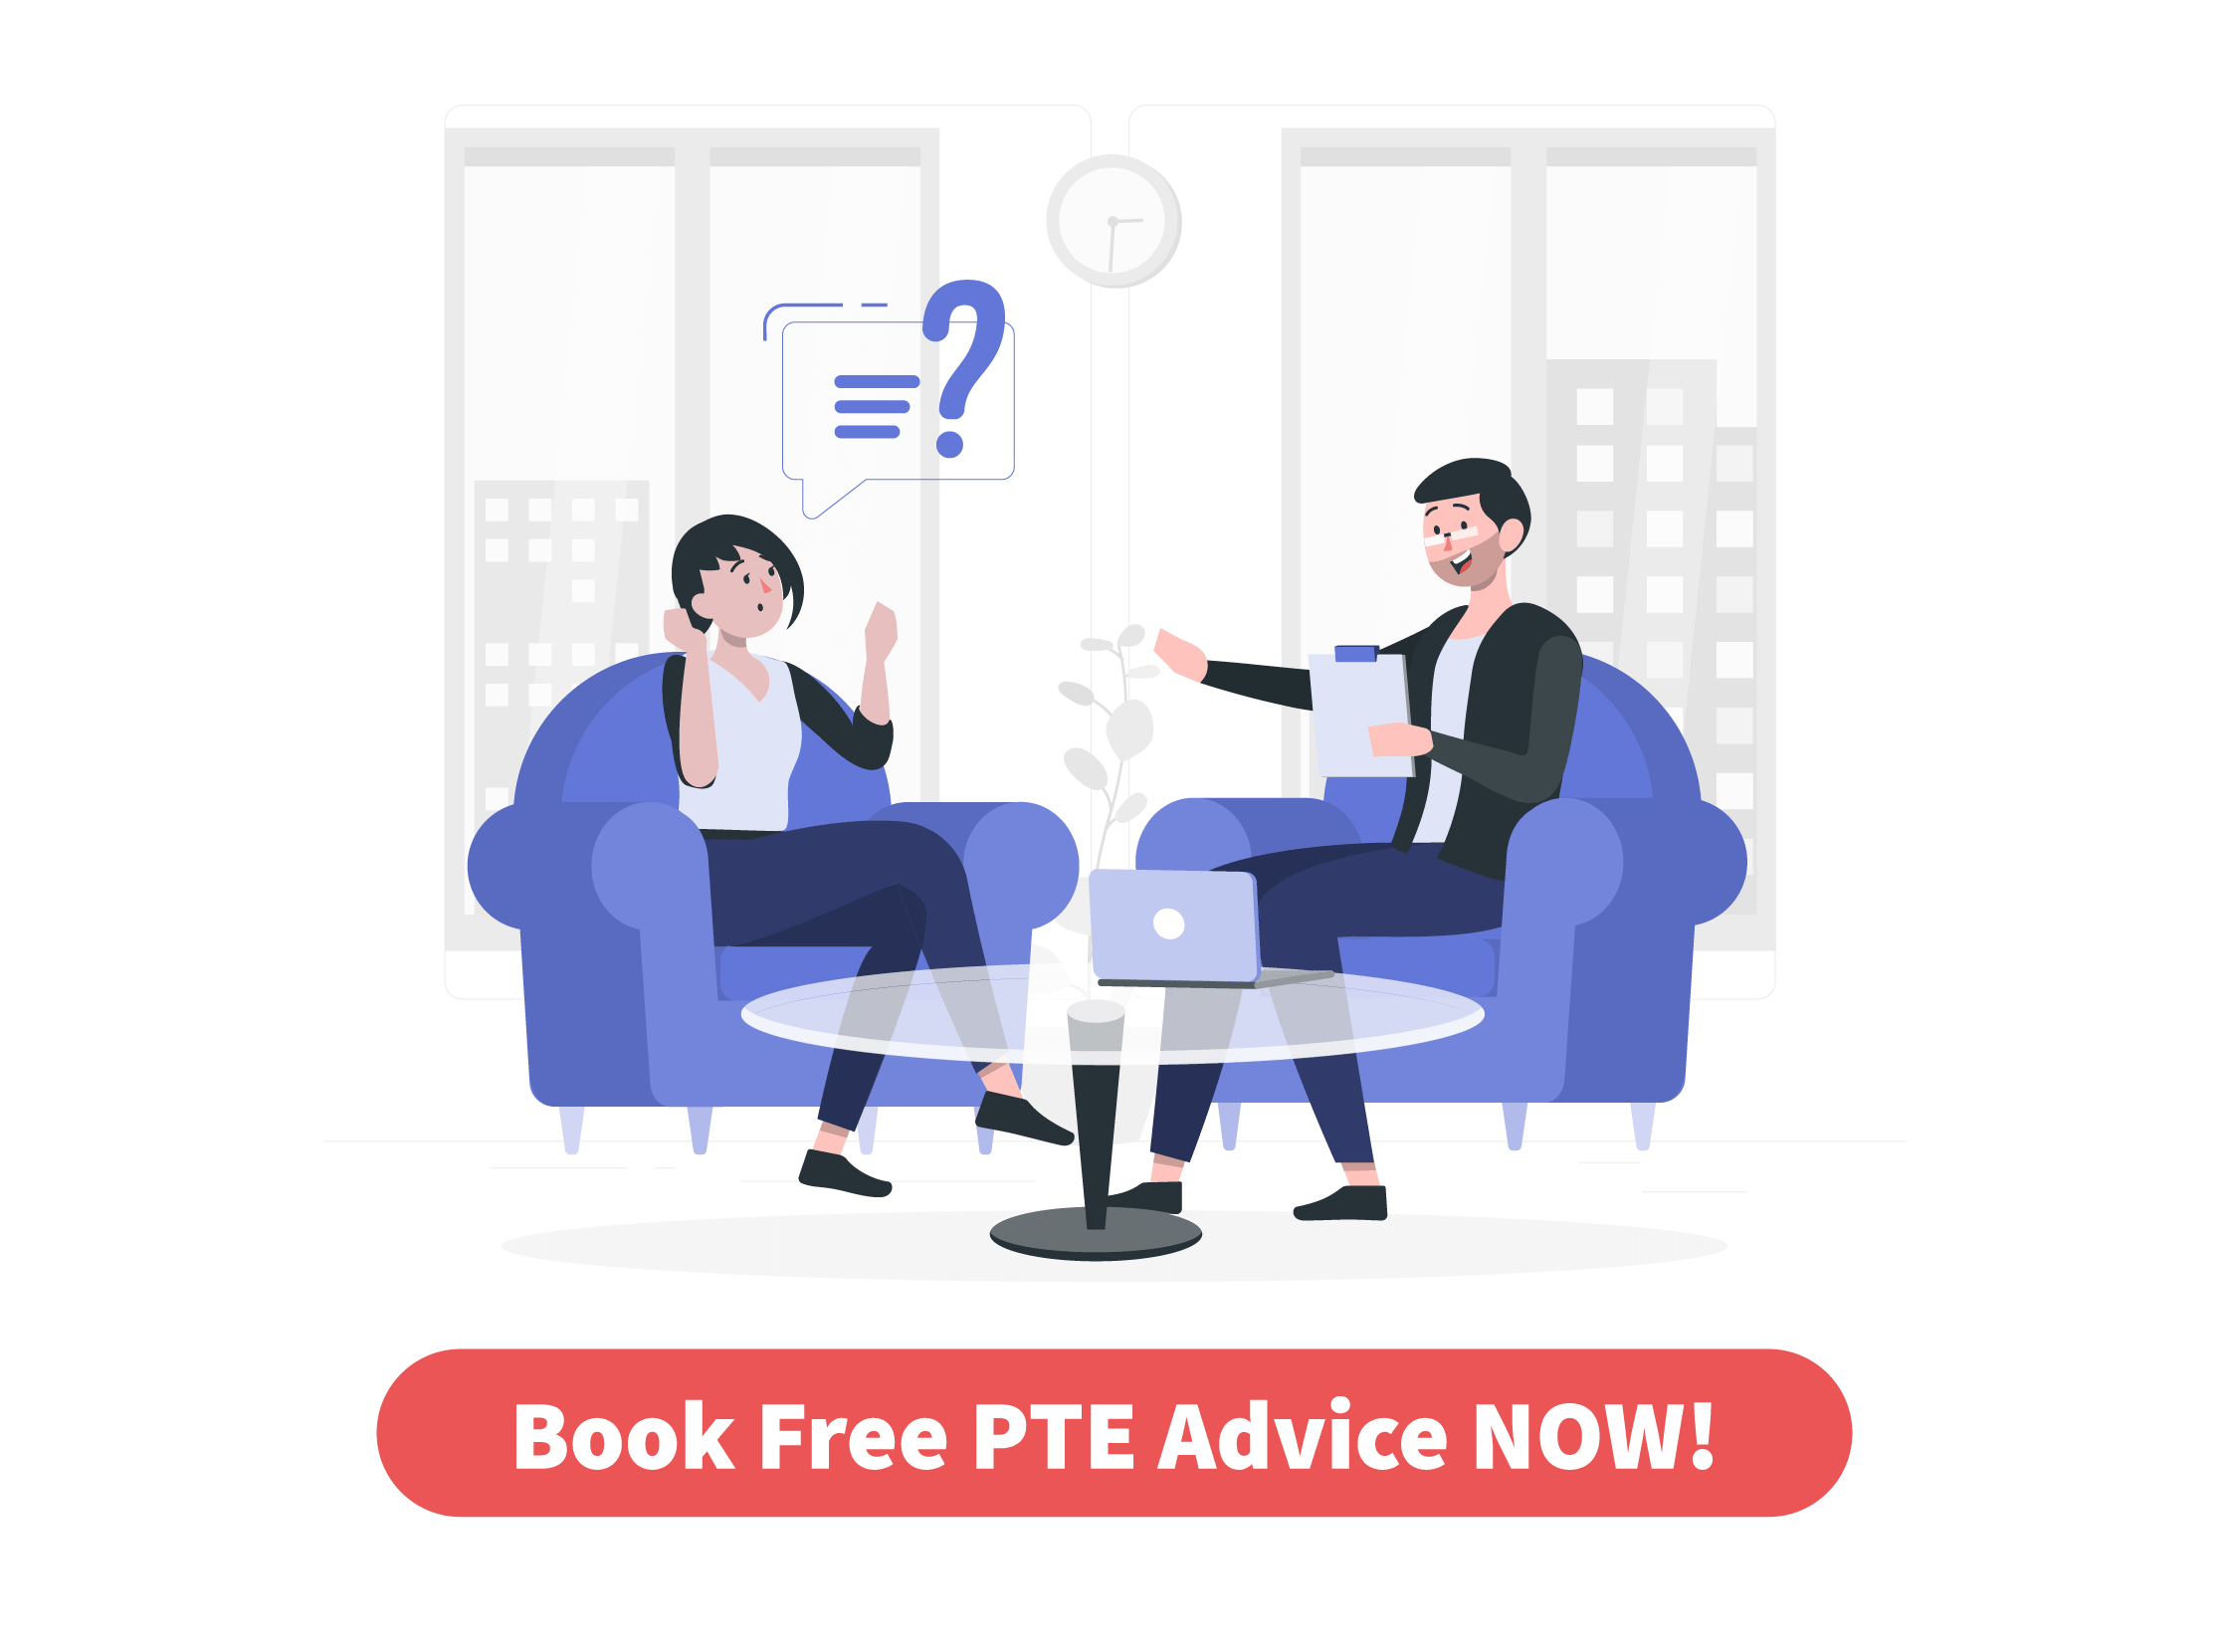 Book Free PTE Advice NOW